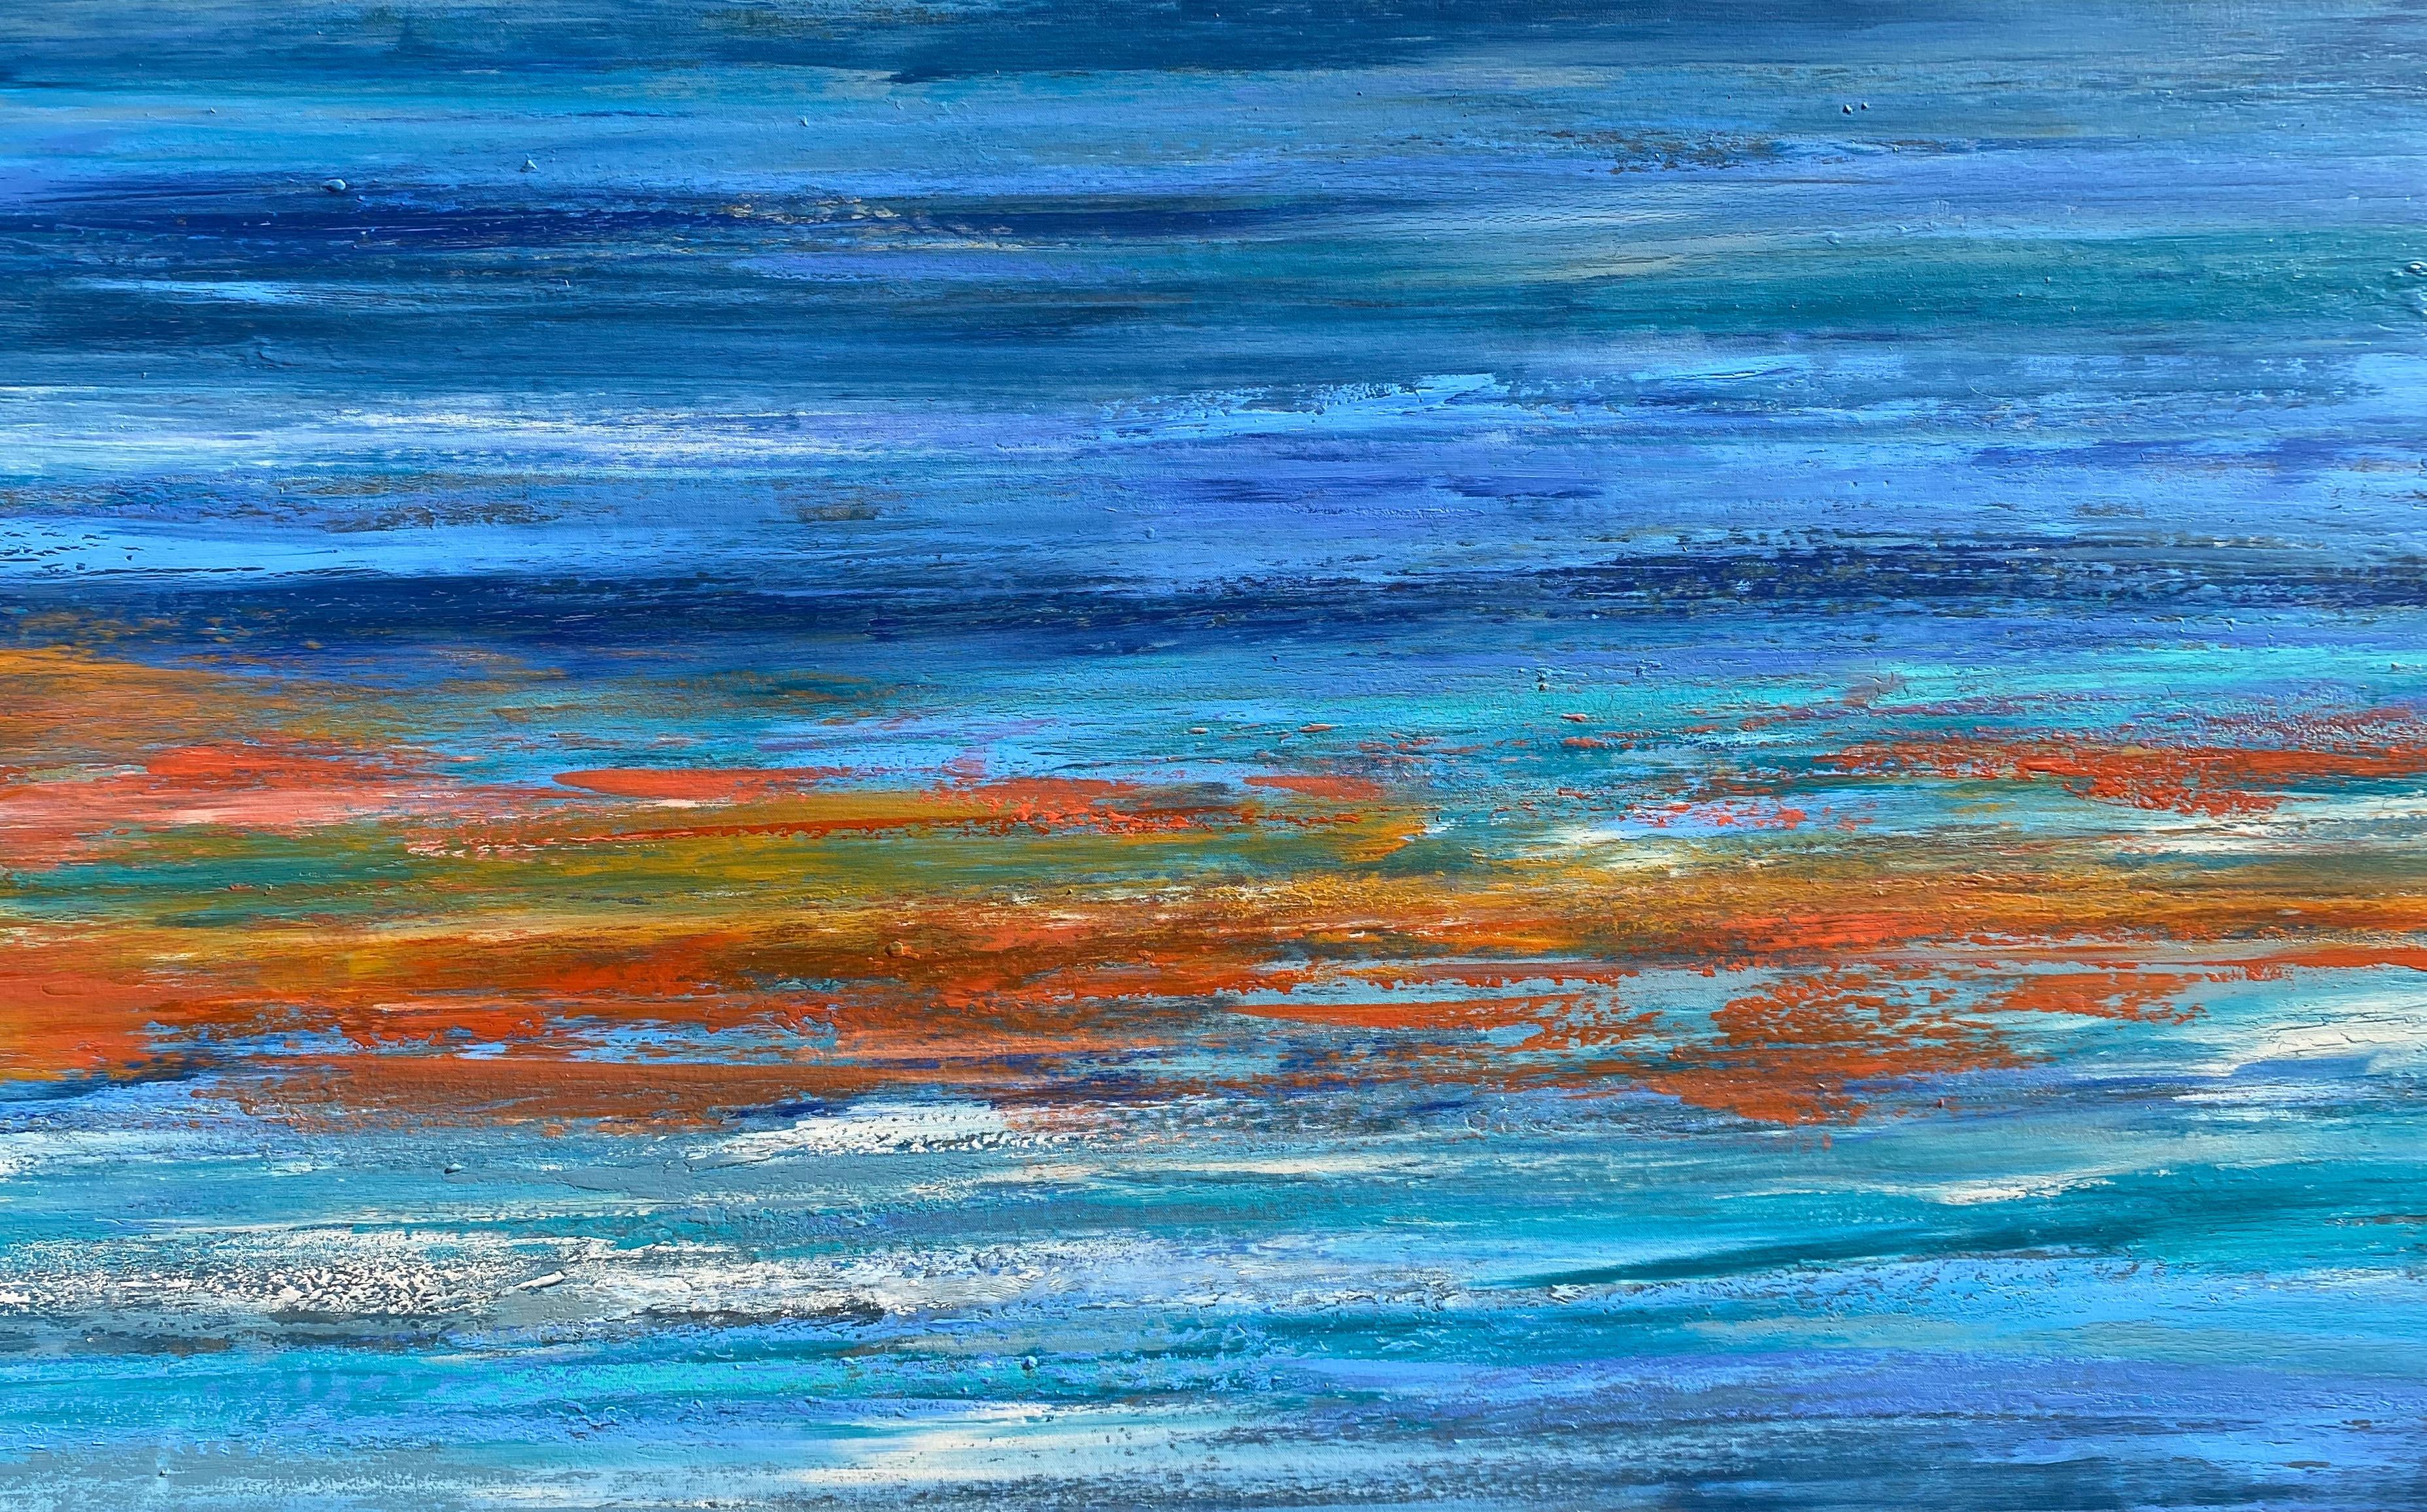 <p>Artist Comments<br>A shimmering view of sunlight reflecting across the surface of the ocean. Layers of blues, green, turquoise and orange ripple and stretch across the canvas. Alicia says the hallmarks of this painting are color and texture. She